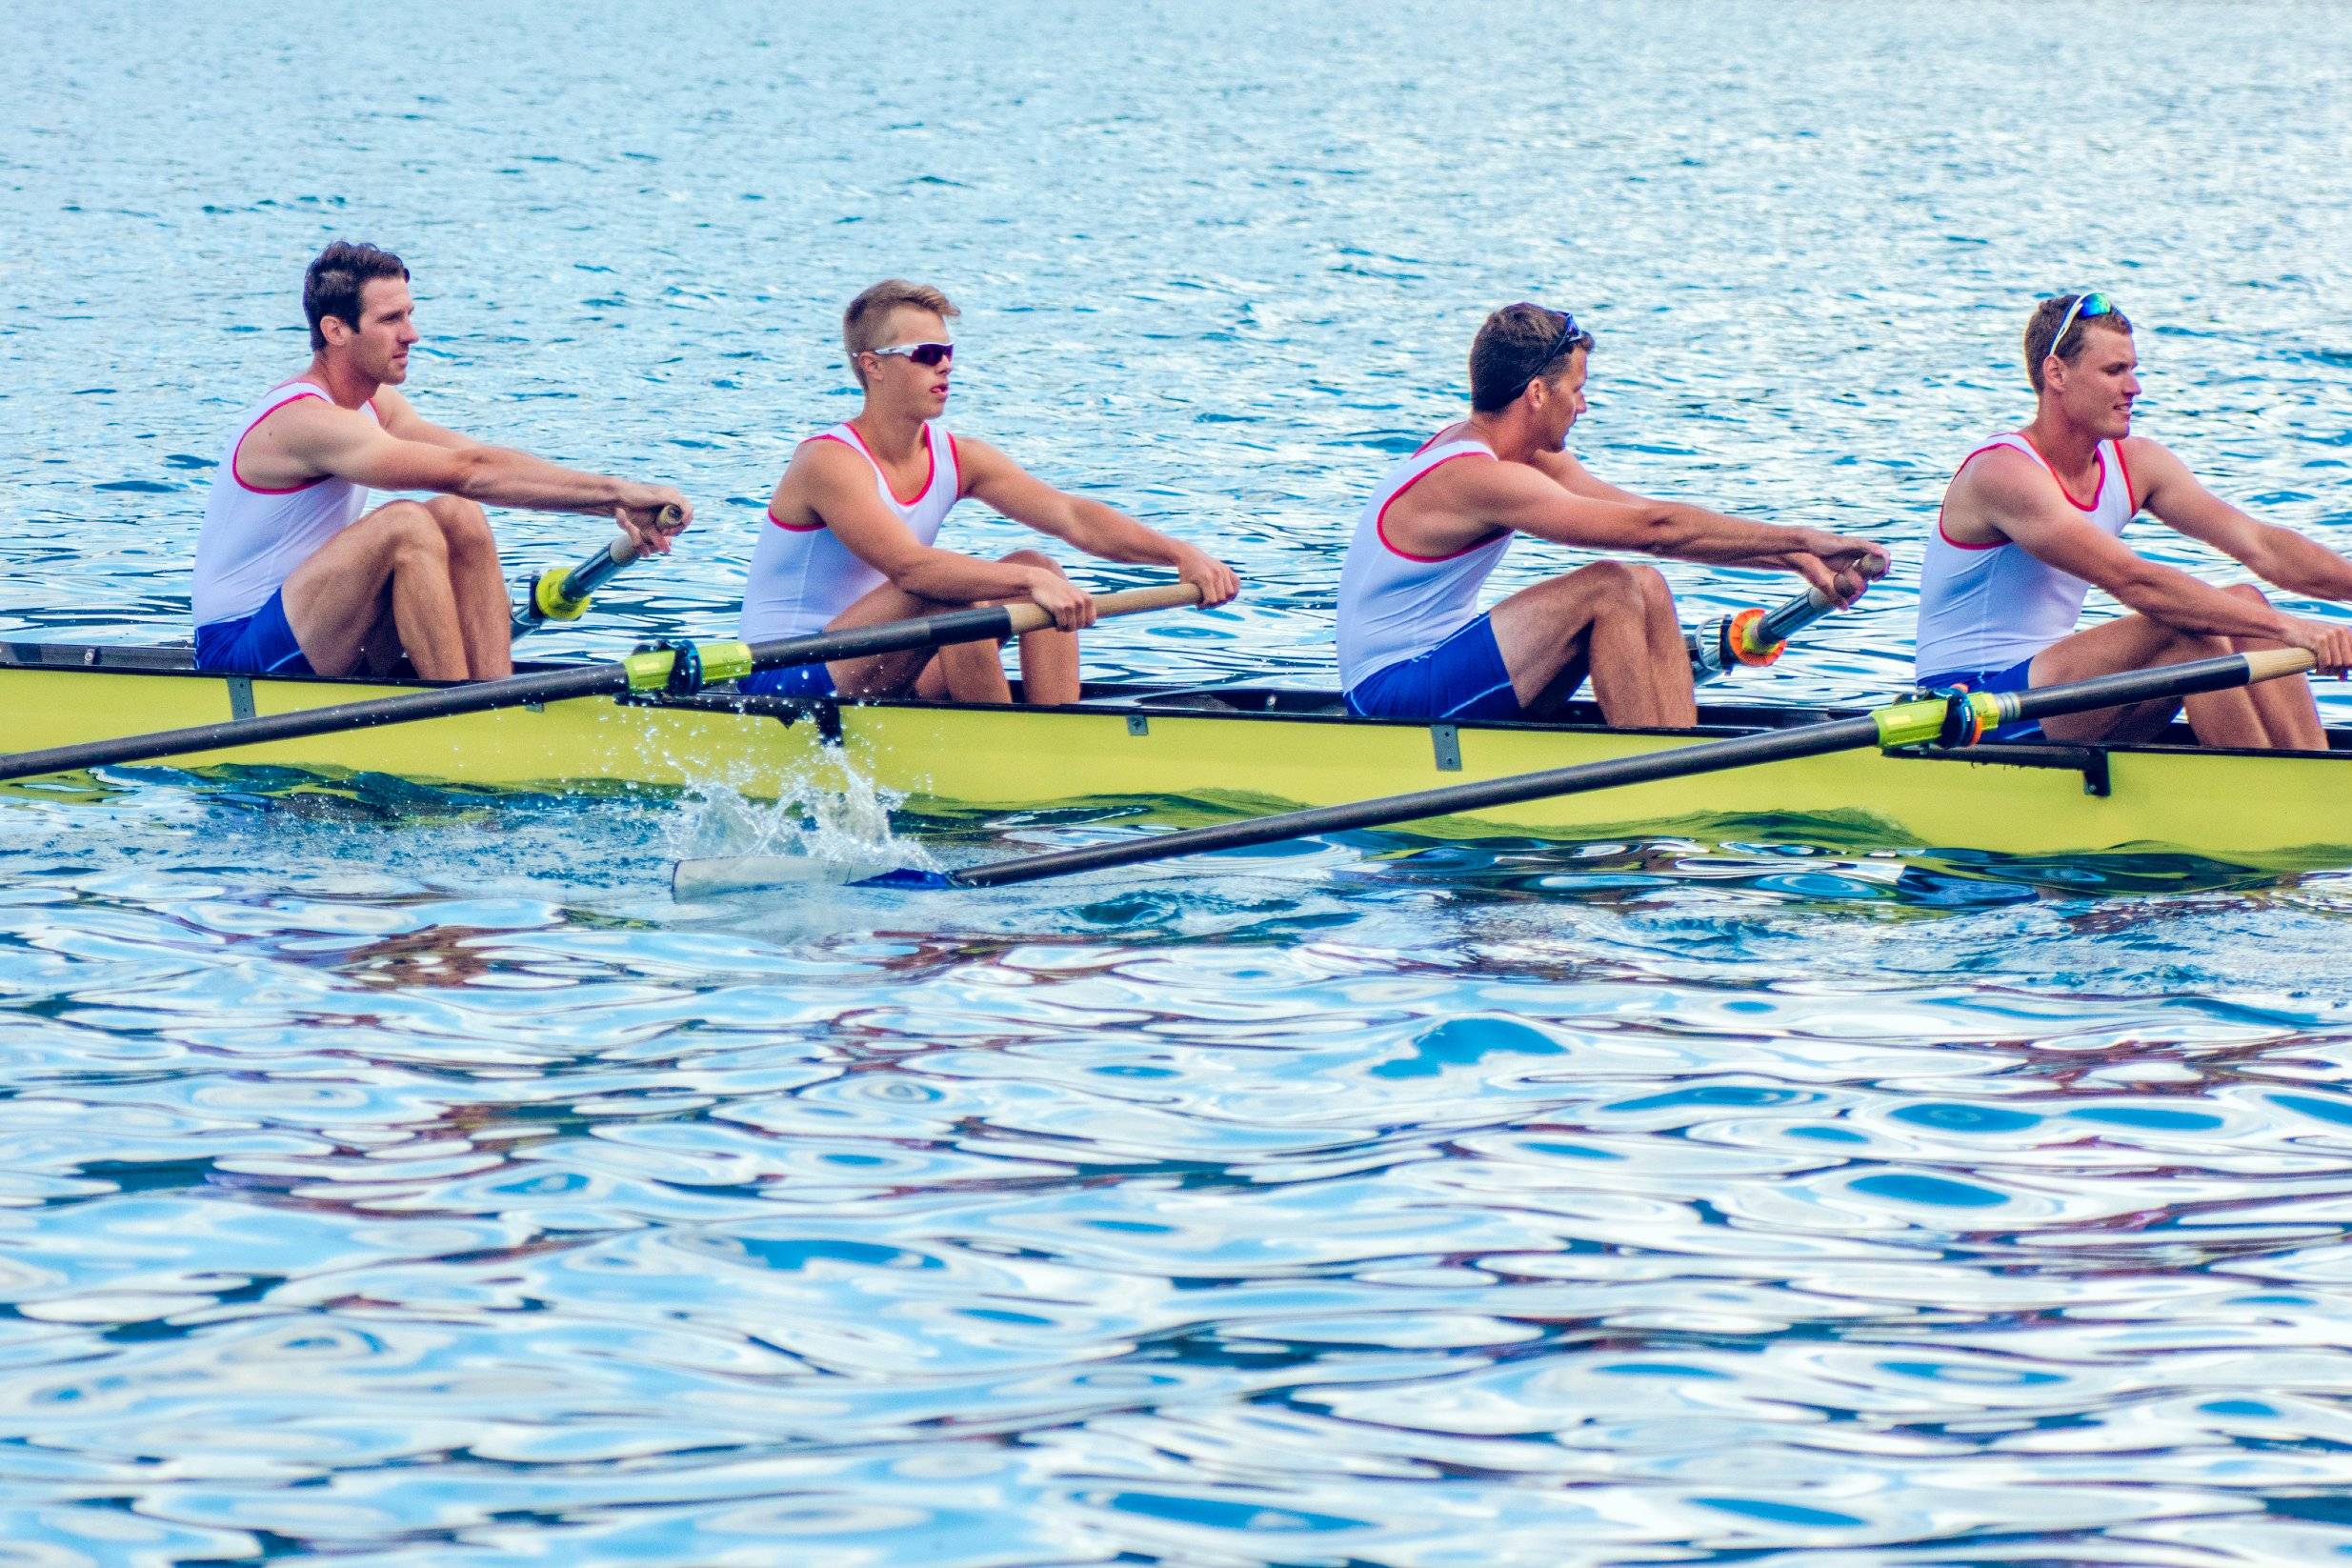 The team of mans are prepearing foe rowing